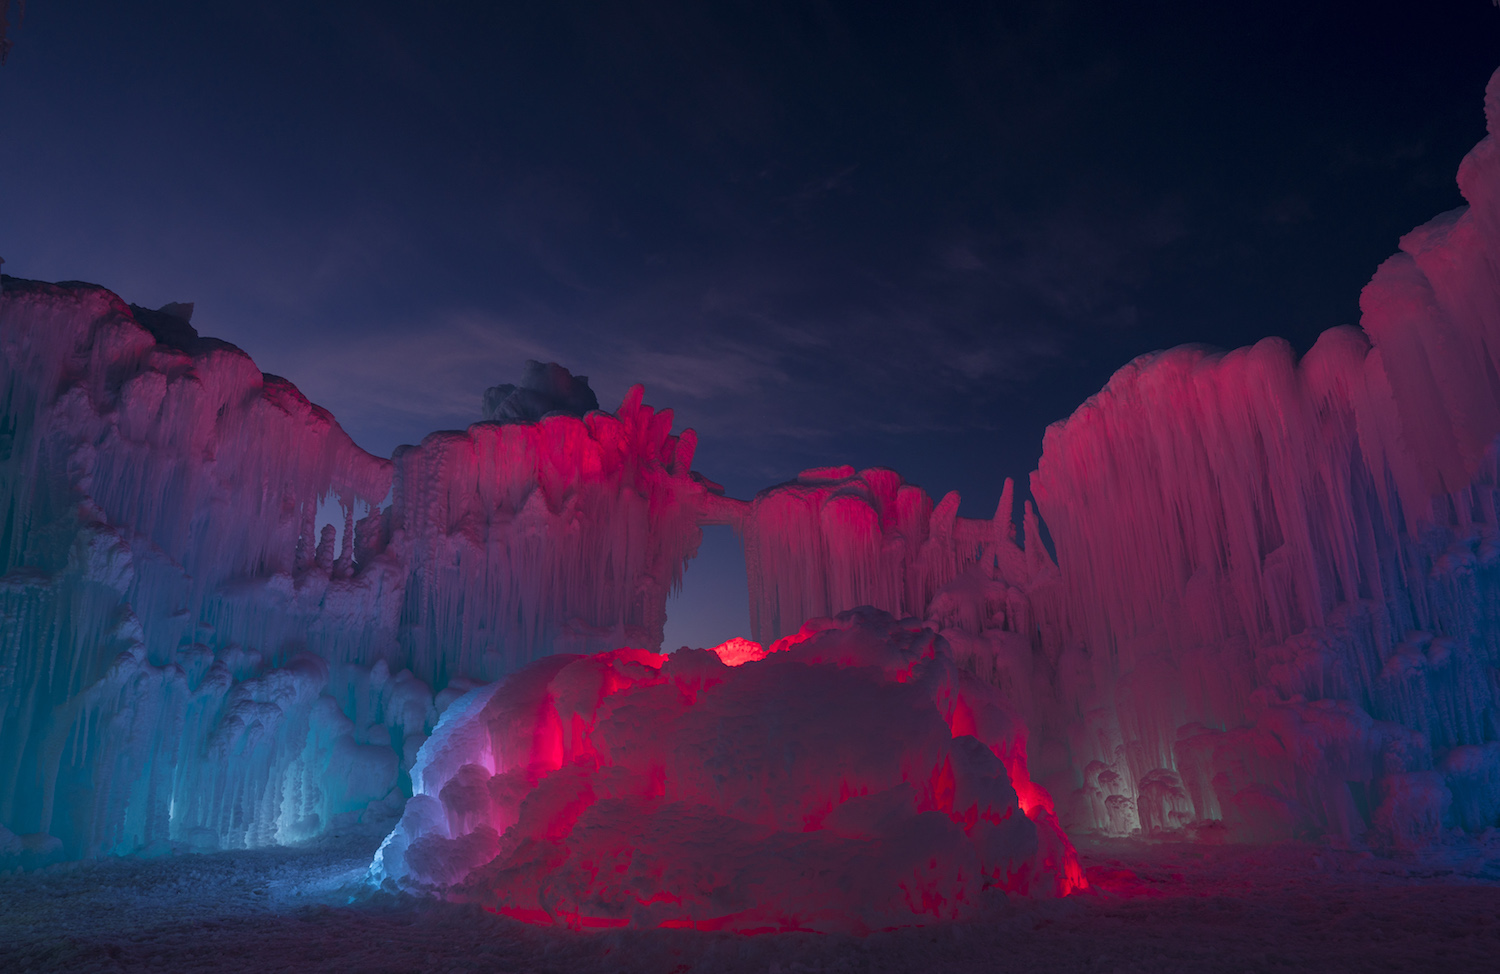 Night Time at Ice Castles